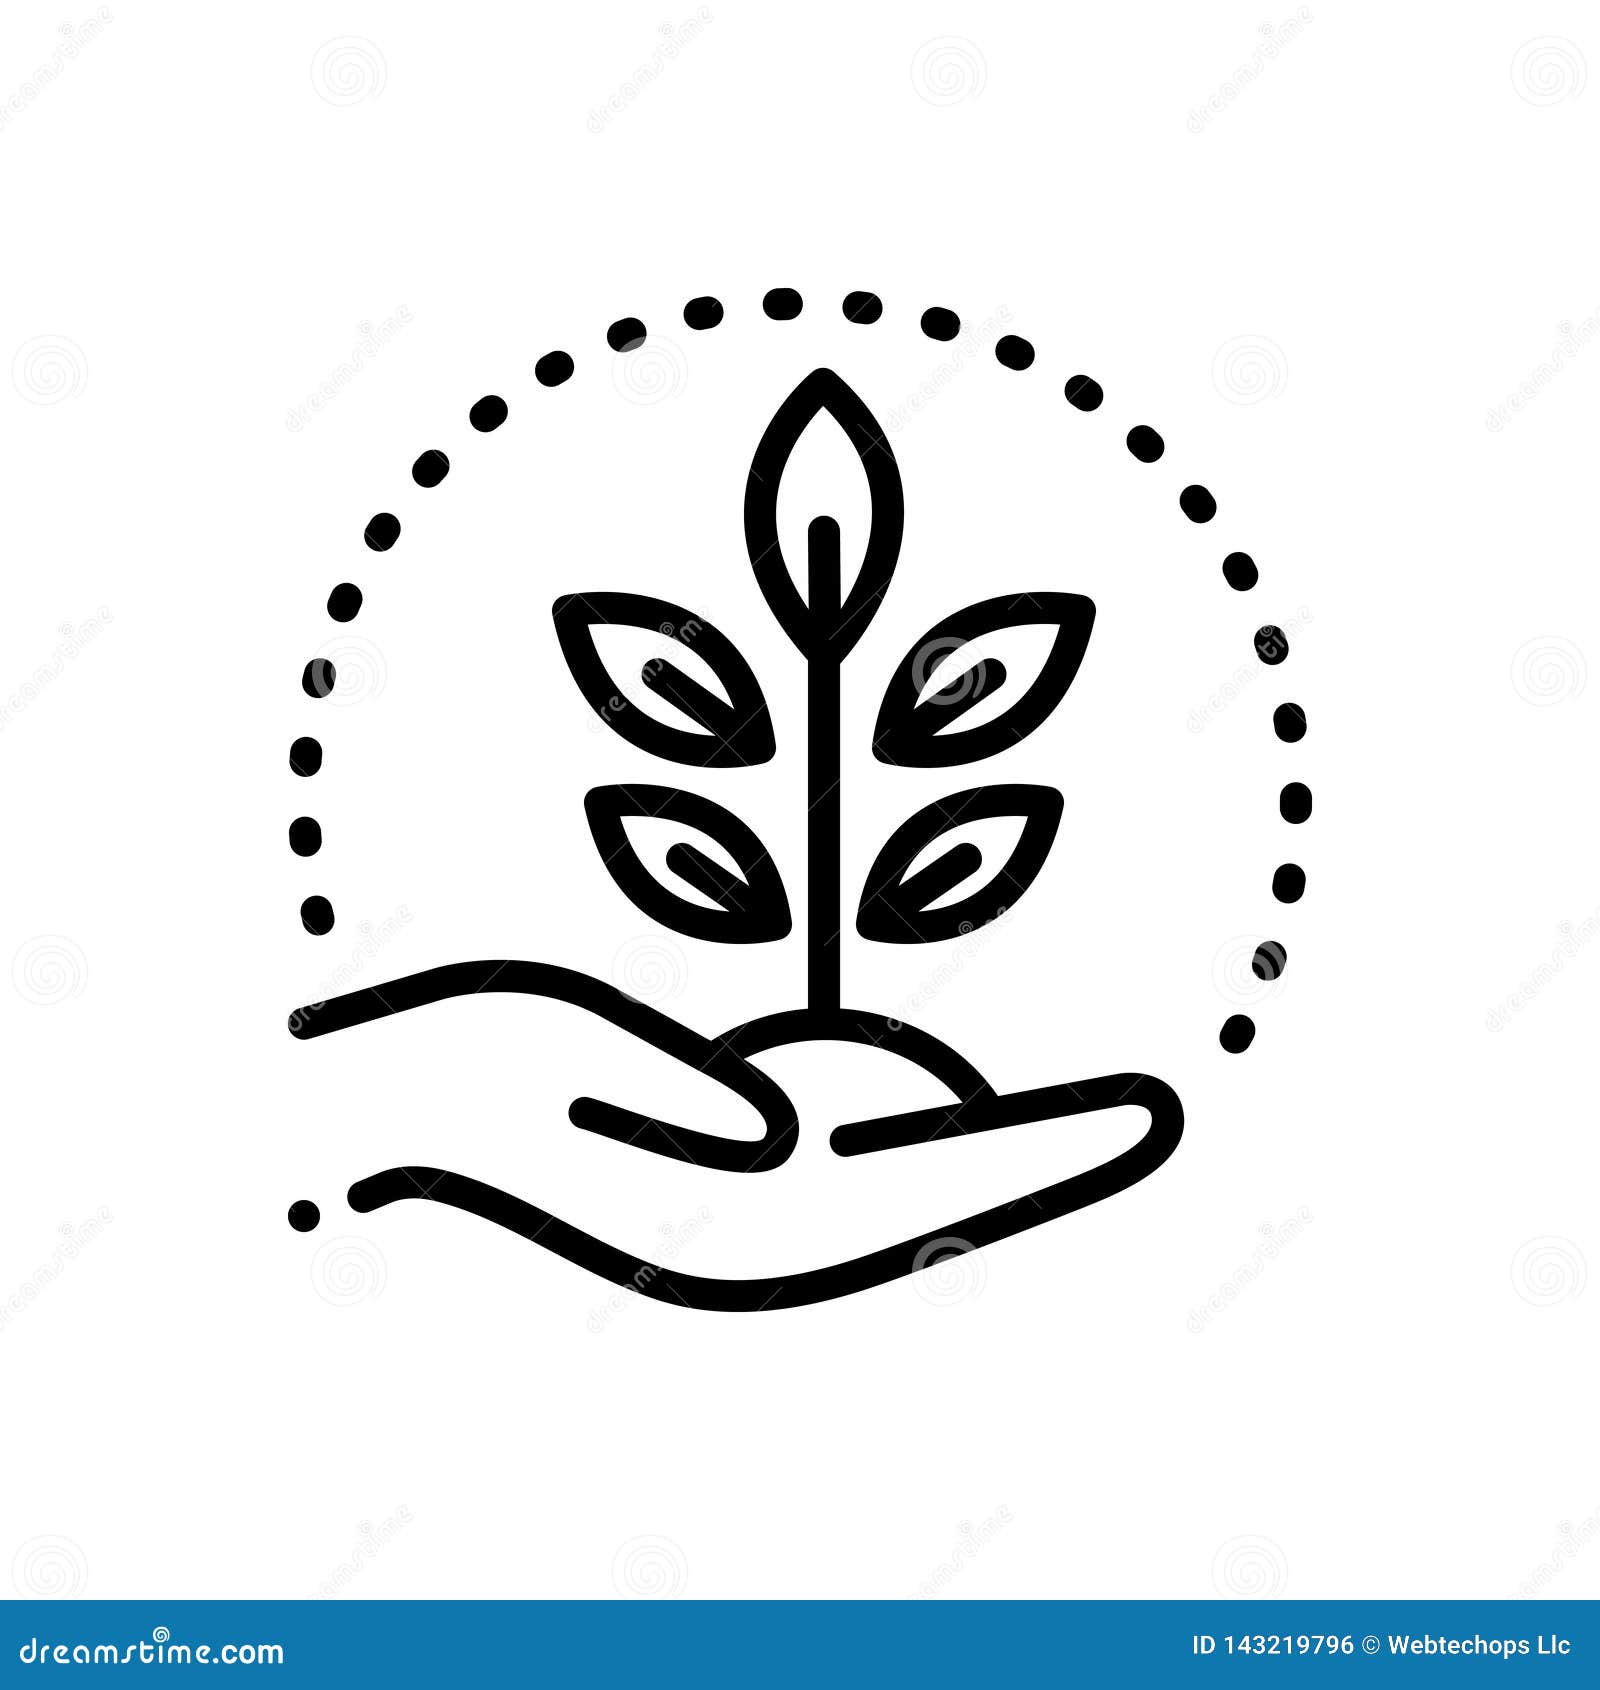 black line icon for conserving, protection and grow